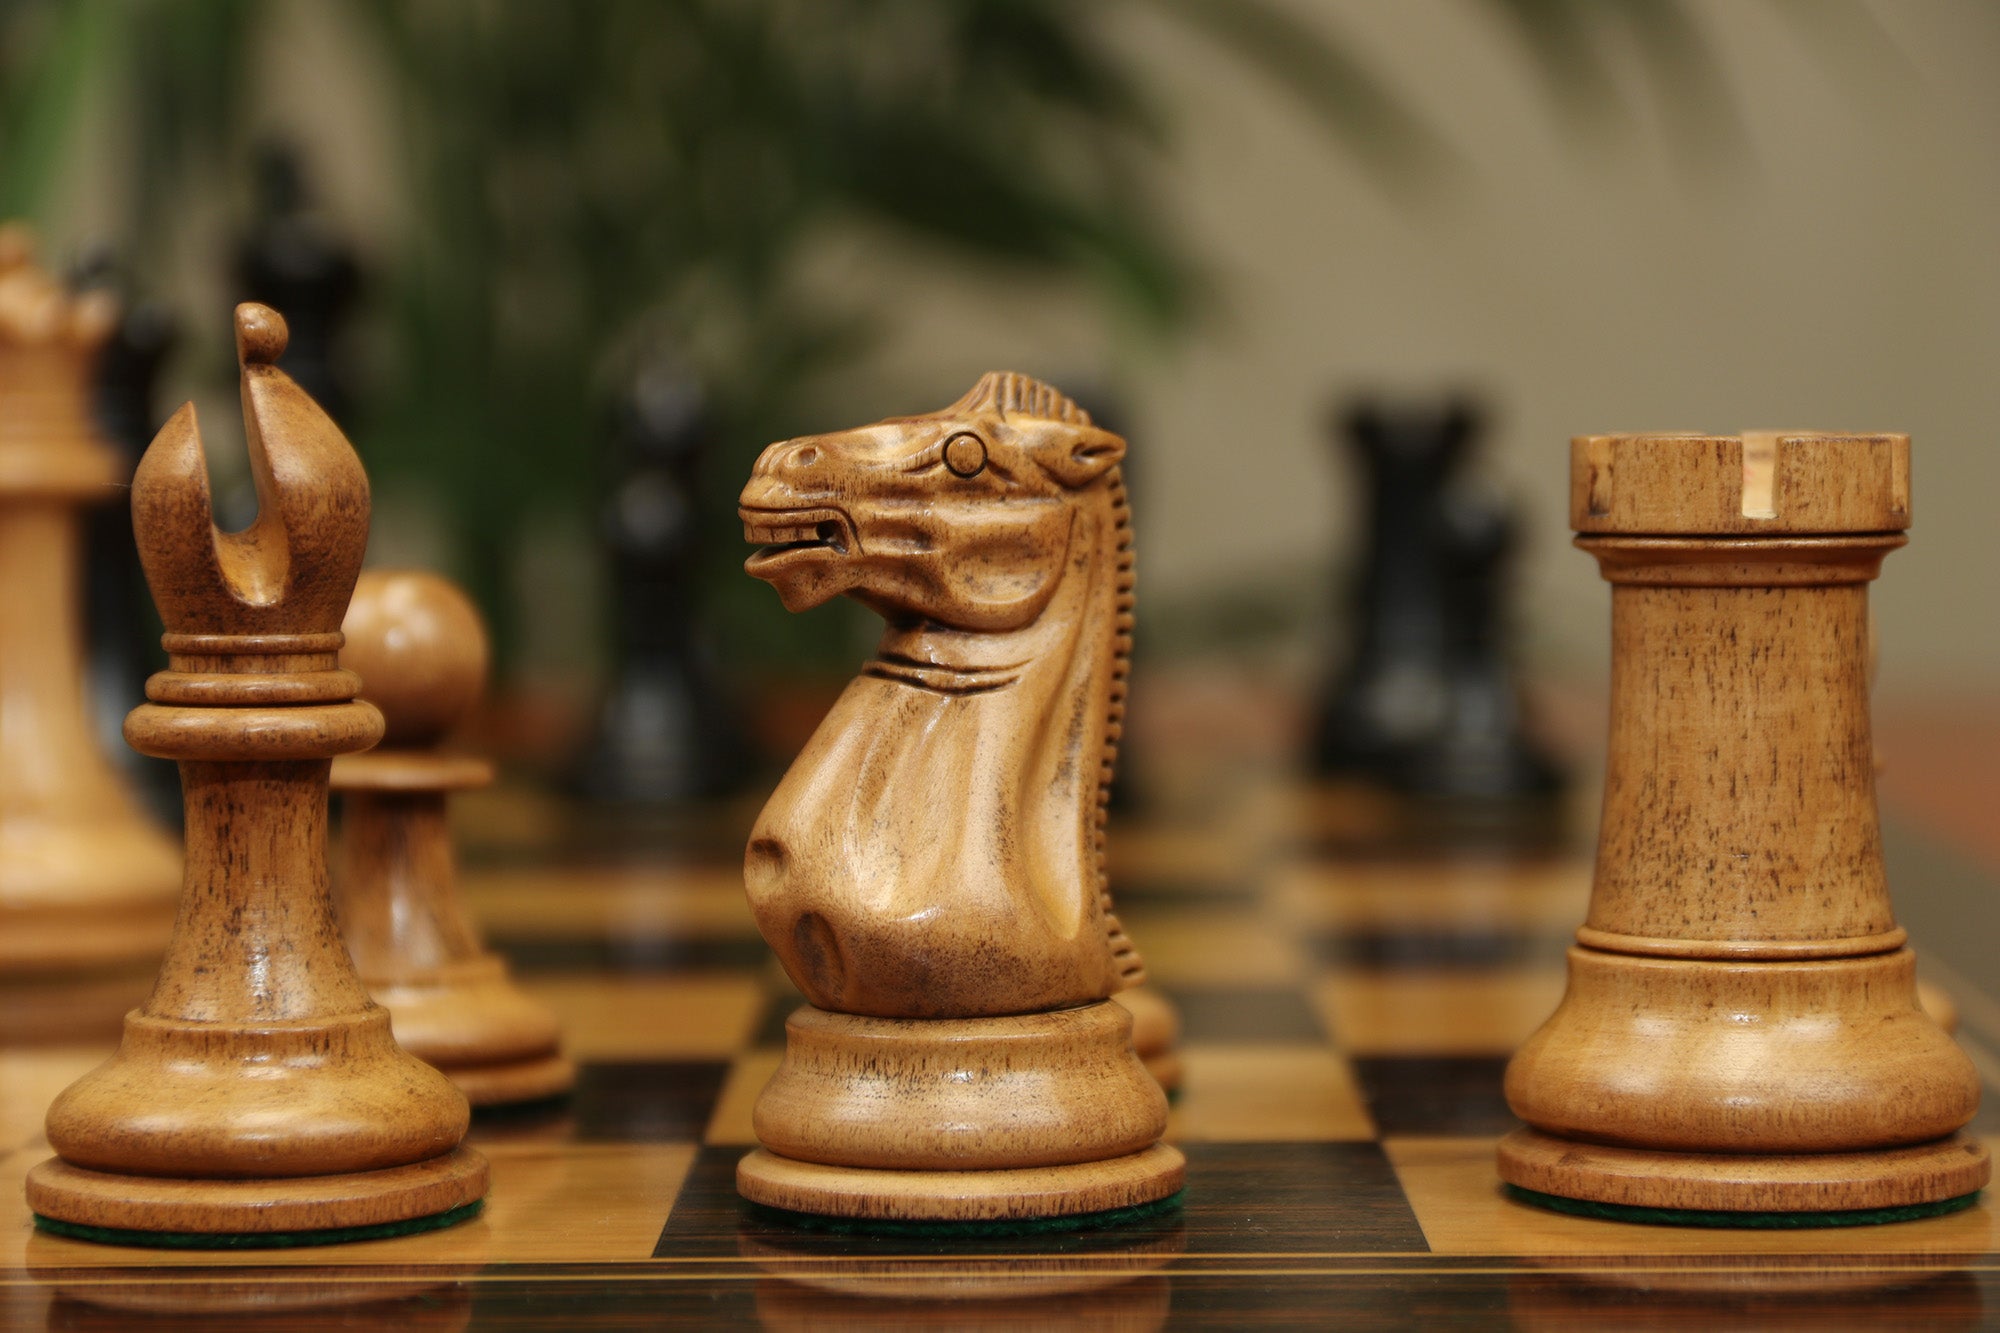 Anderson 1855-60 Reproduced 4.4" Staunton Chessmen in Distressed Boxwood & Ebonised